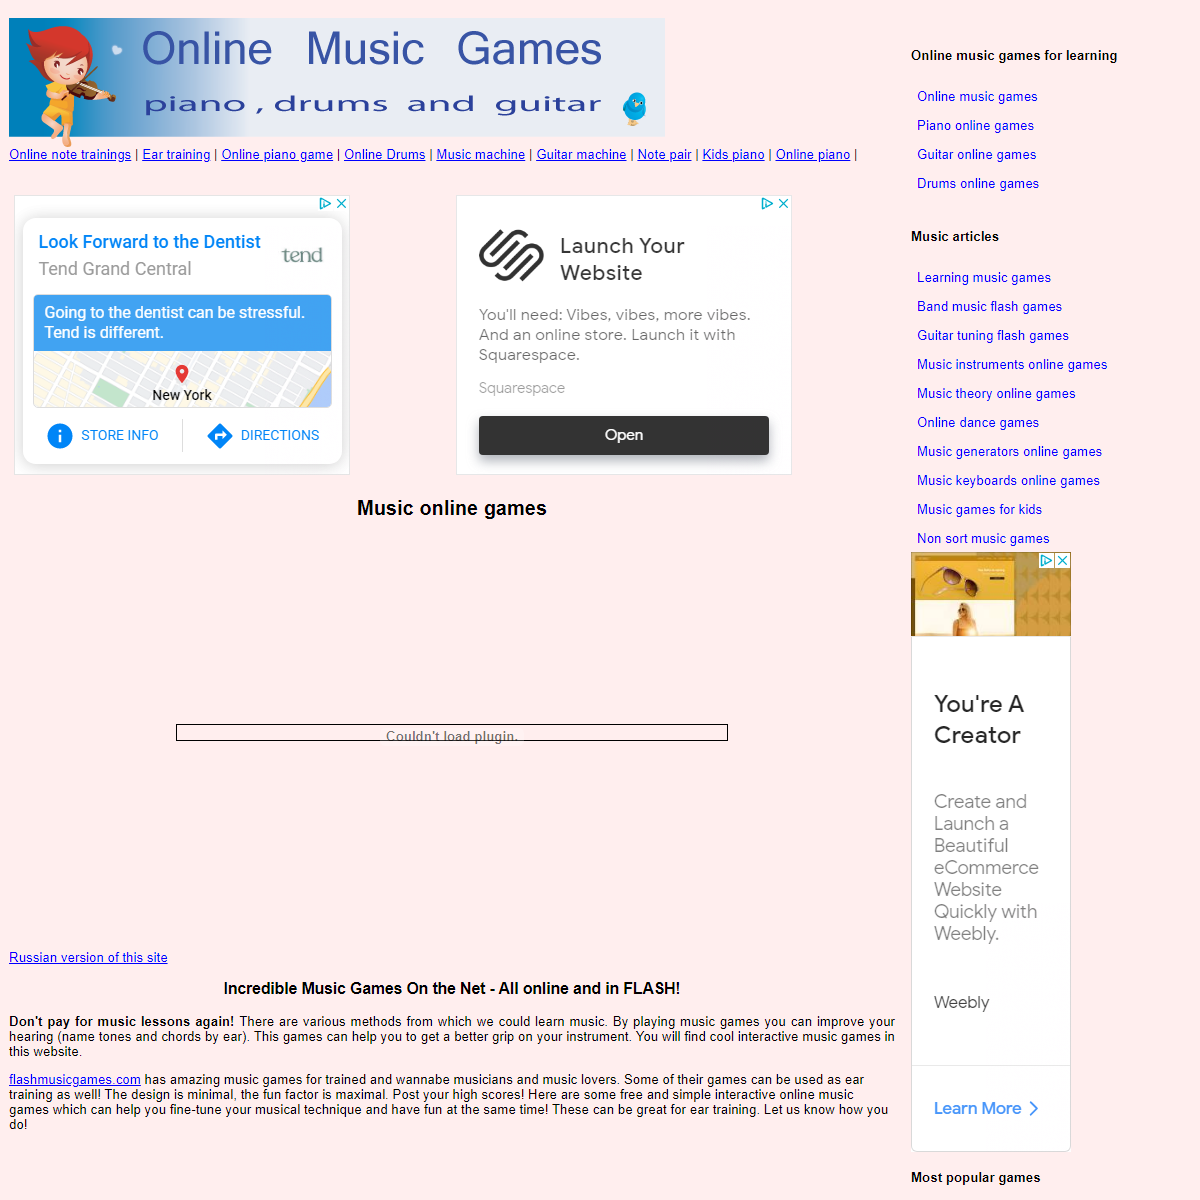 A complete backup of http://flashmusicgames.com/